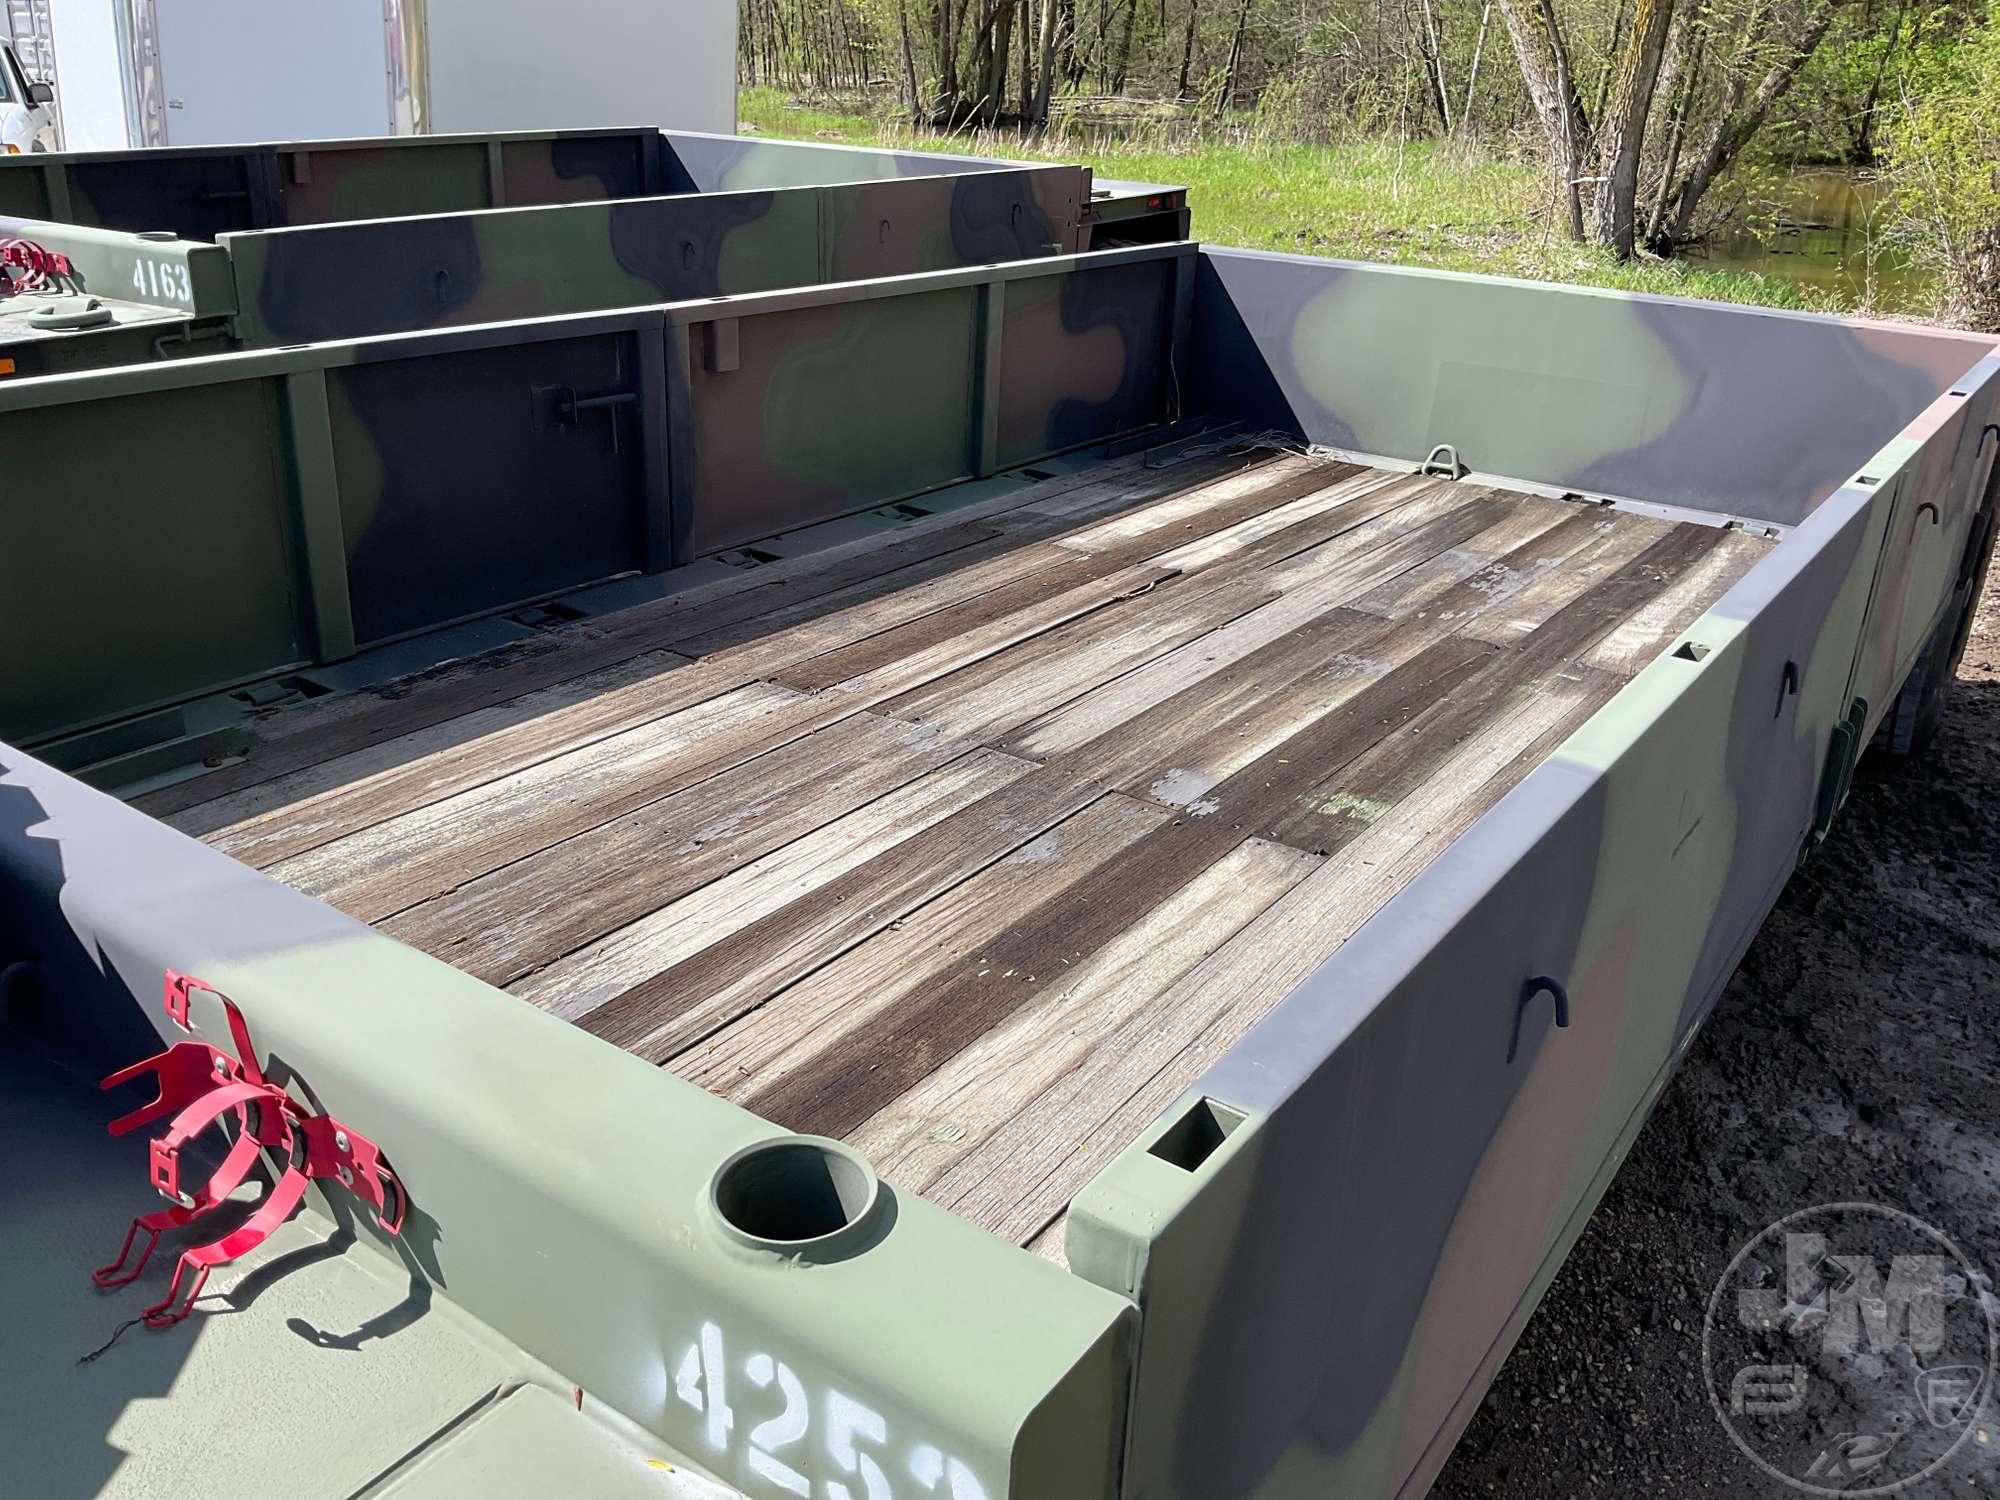 2010 DRS SUSTAINMENT SYSTEMS M989A1 VIN: NW2FGP 4252 T/A HEAVY EXPANDED MOBILITY AMMUNITION TRAILER